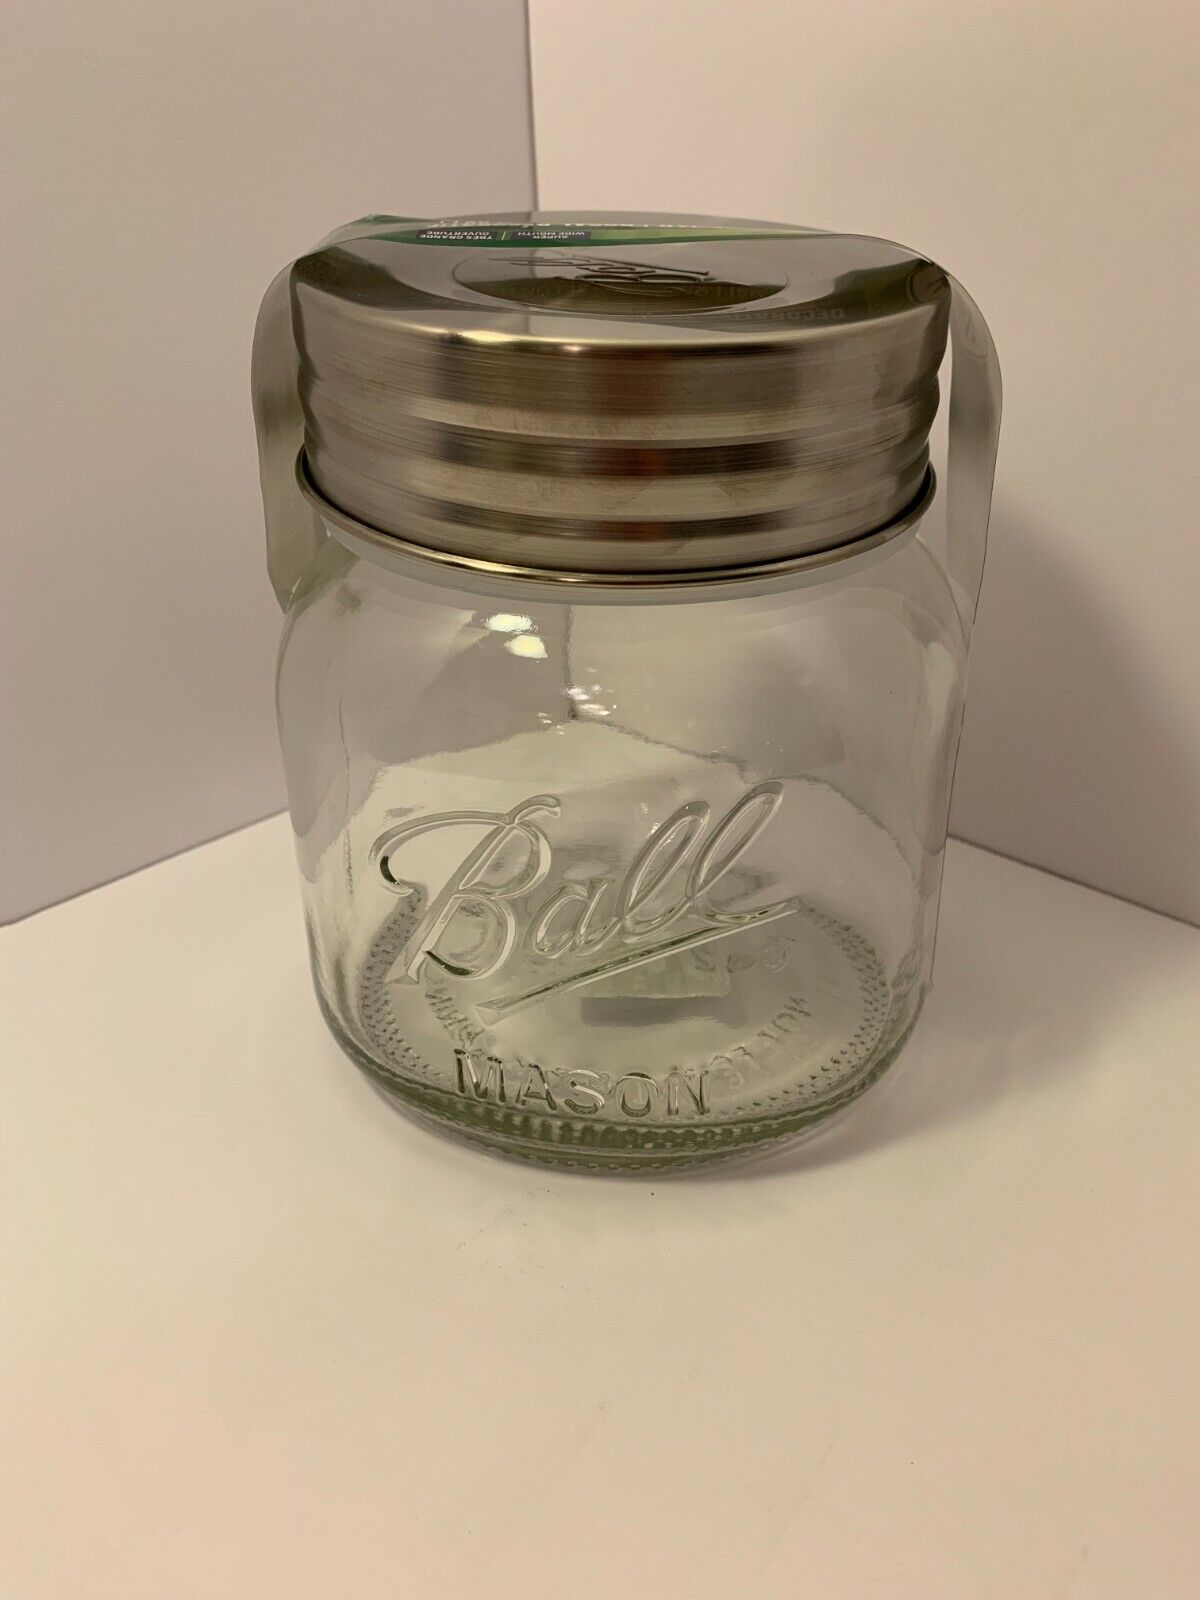 Ball Mason 1/2gal. Decorative Canister Jar 64 oz. Extra Wide Mouth Qty of 1 New